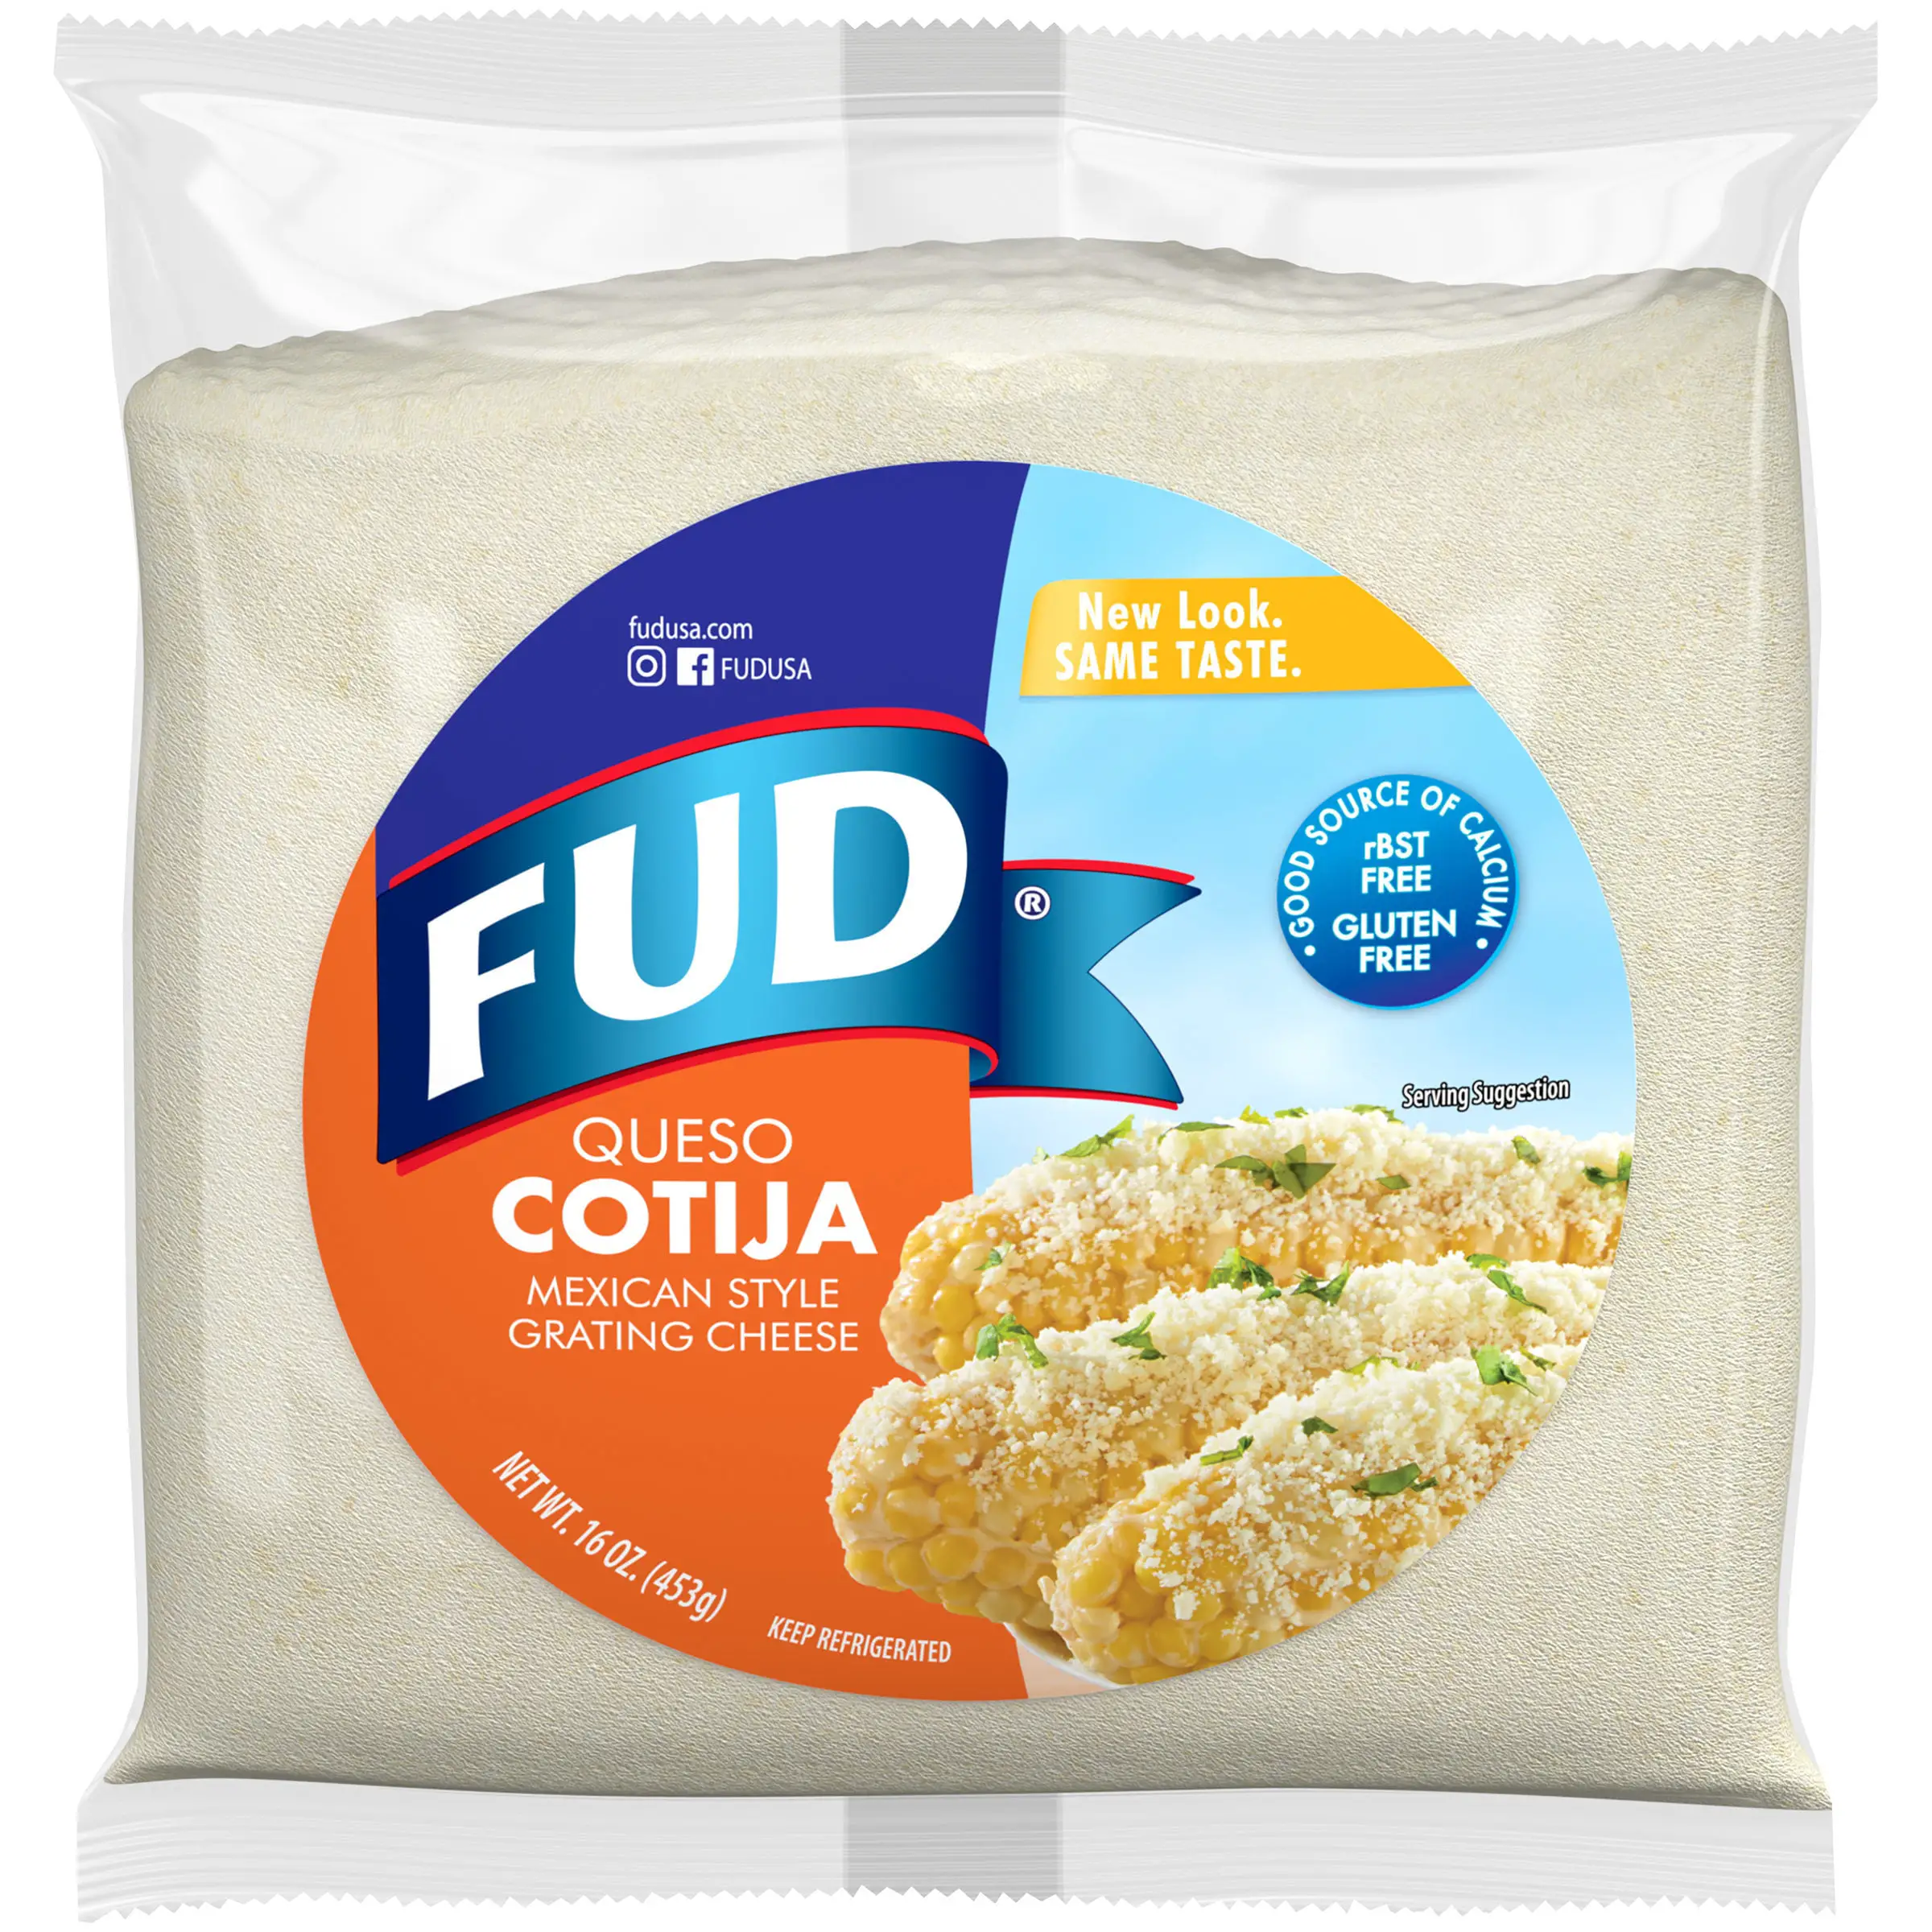 FUD® Queso Cotija Mexican Style Grating Cheese 16 oz. Bag